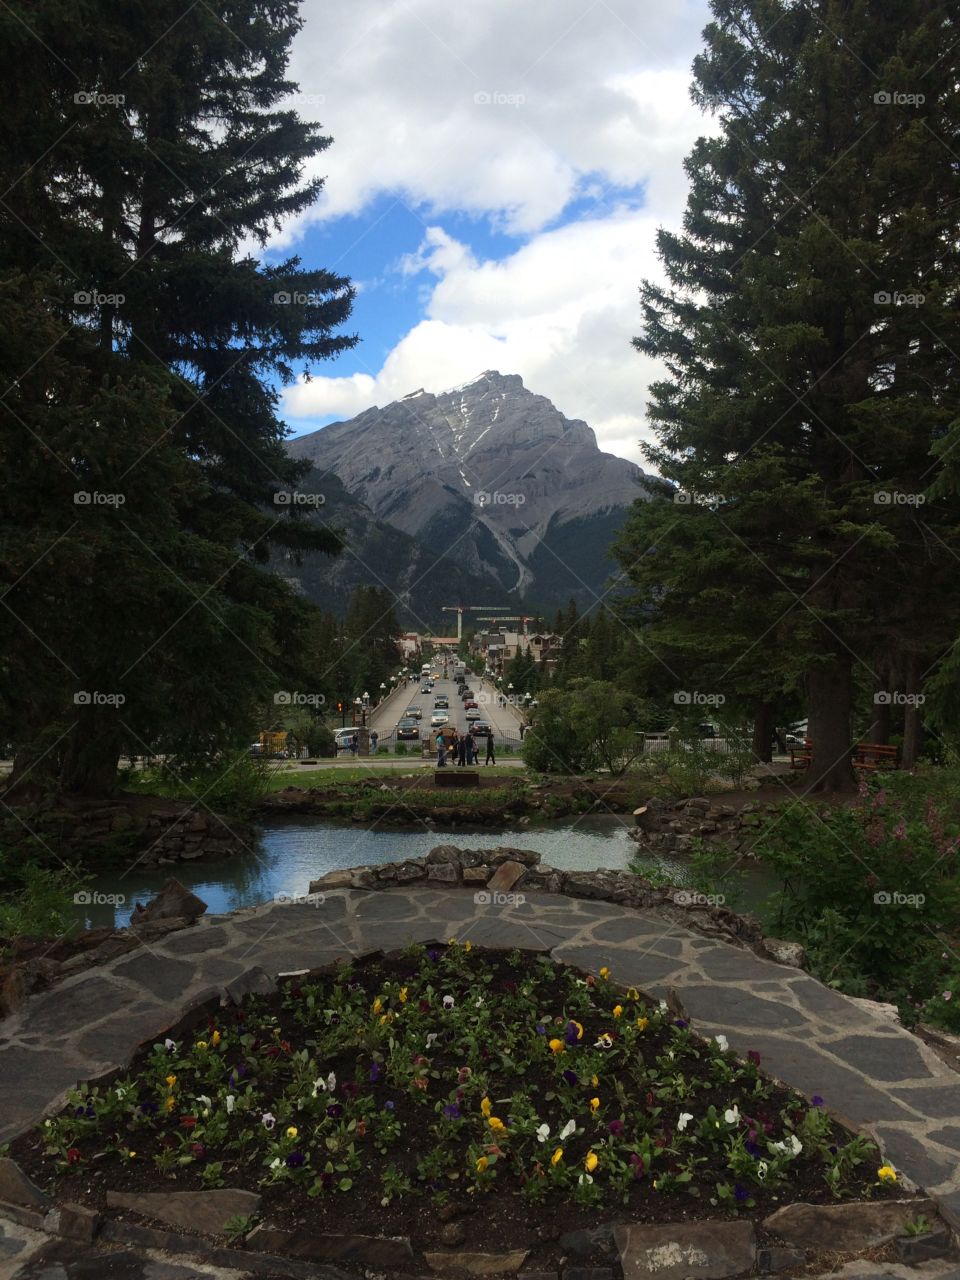 Banff Alberta from a DNRs view.